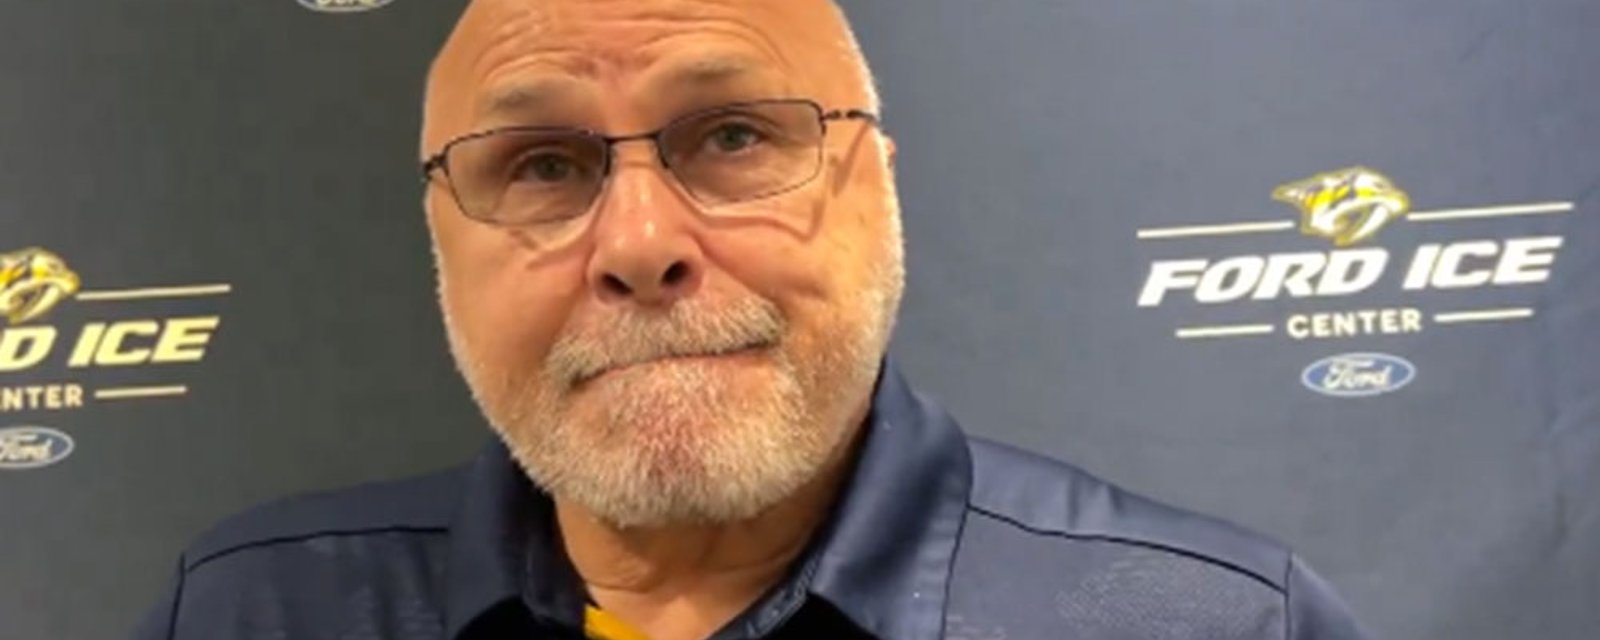 Barry Trotz tips his hand a bit when asked about possible Mitch Marner trade 